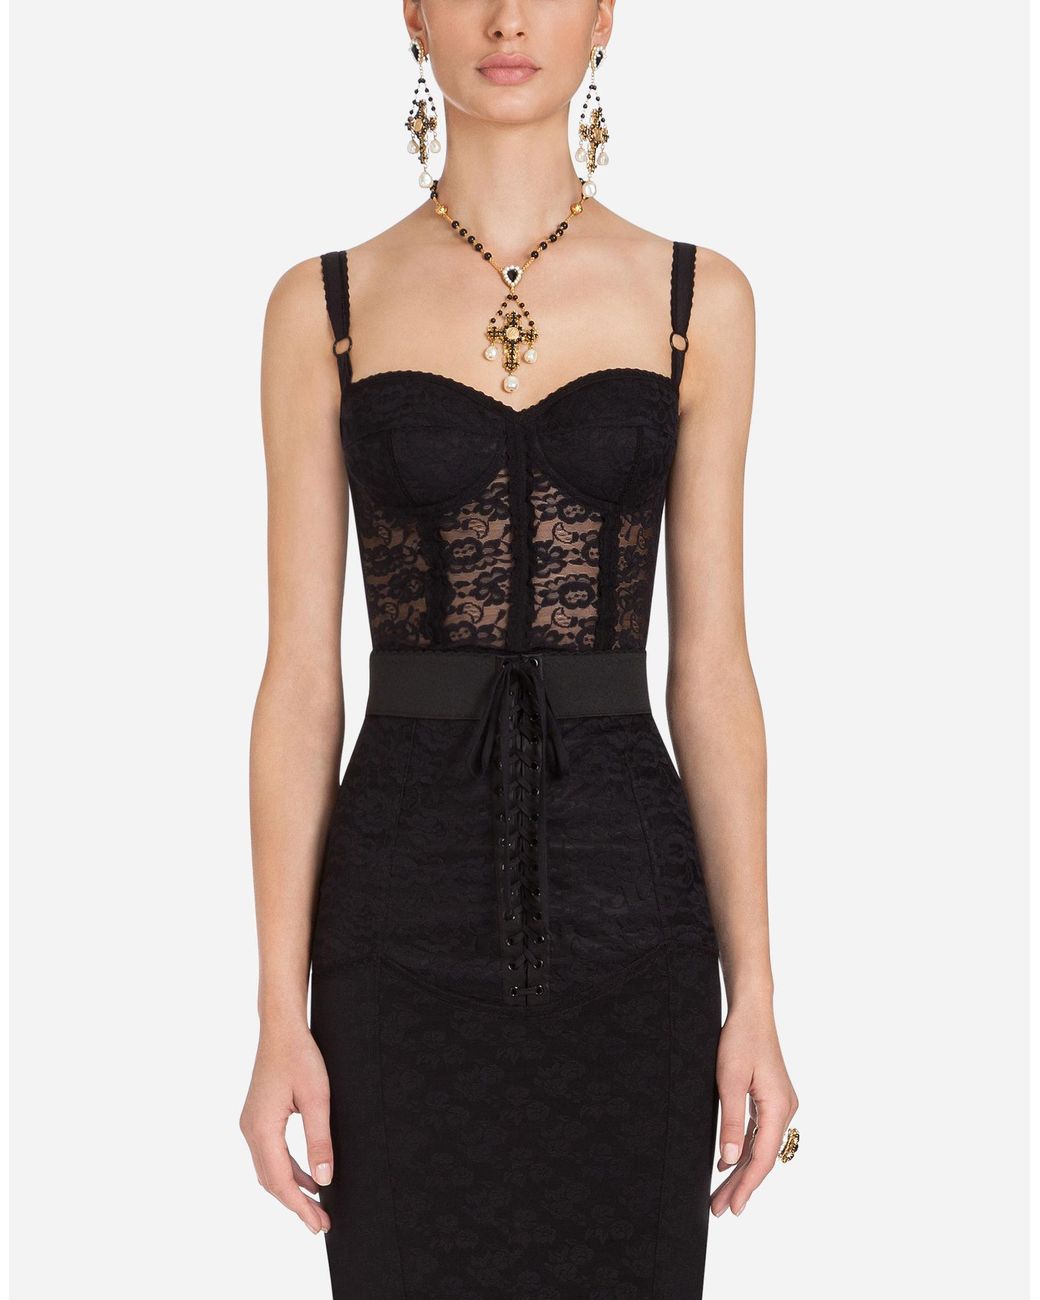 Floral lace bustier in black - Dolce Gabbana